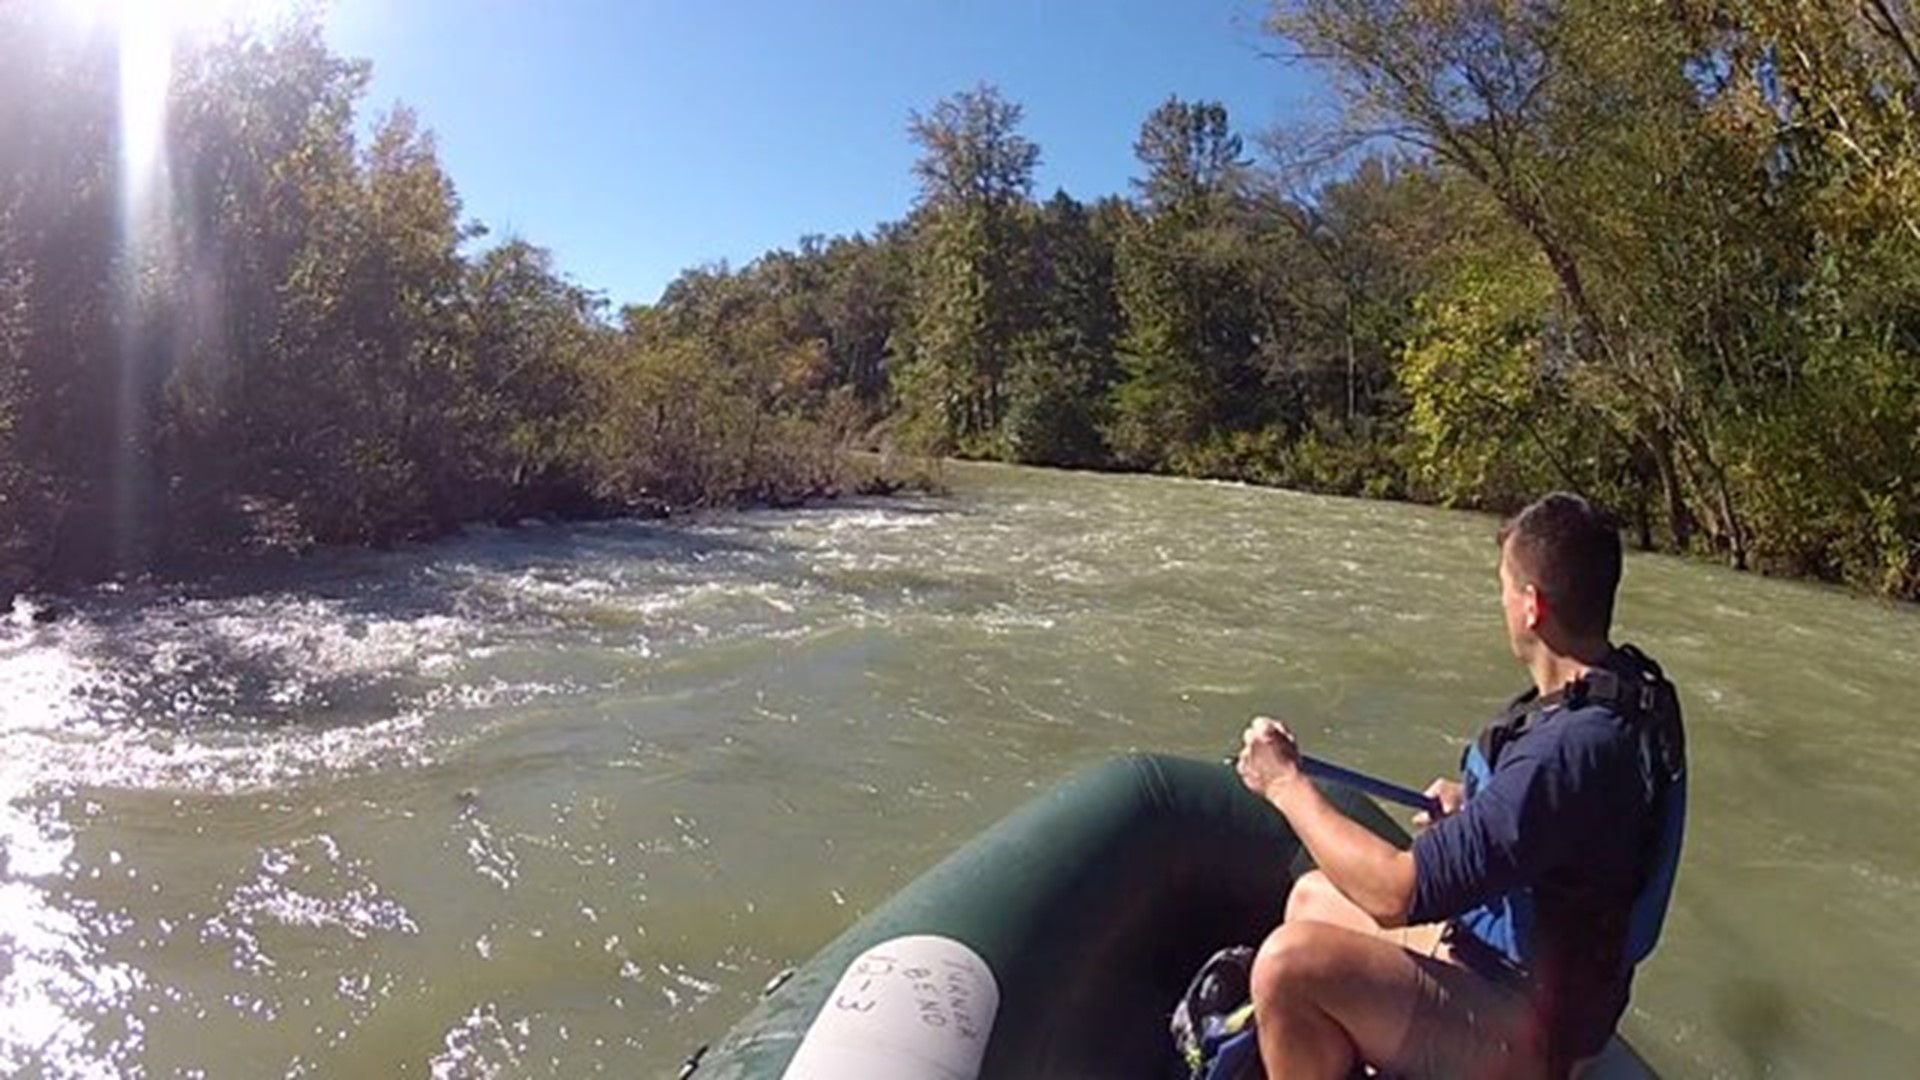 Rafting the Mulberry River at Turner Bend